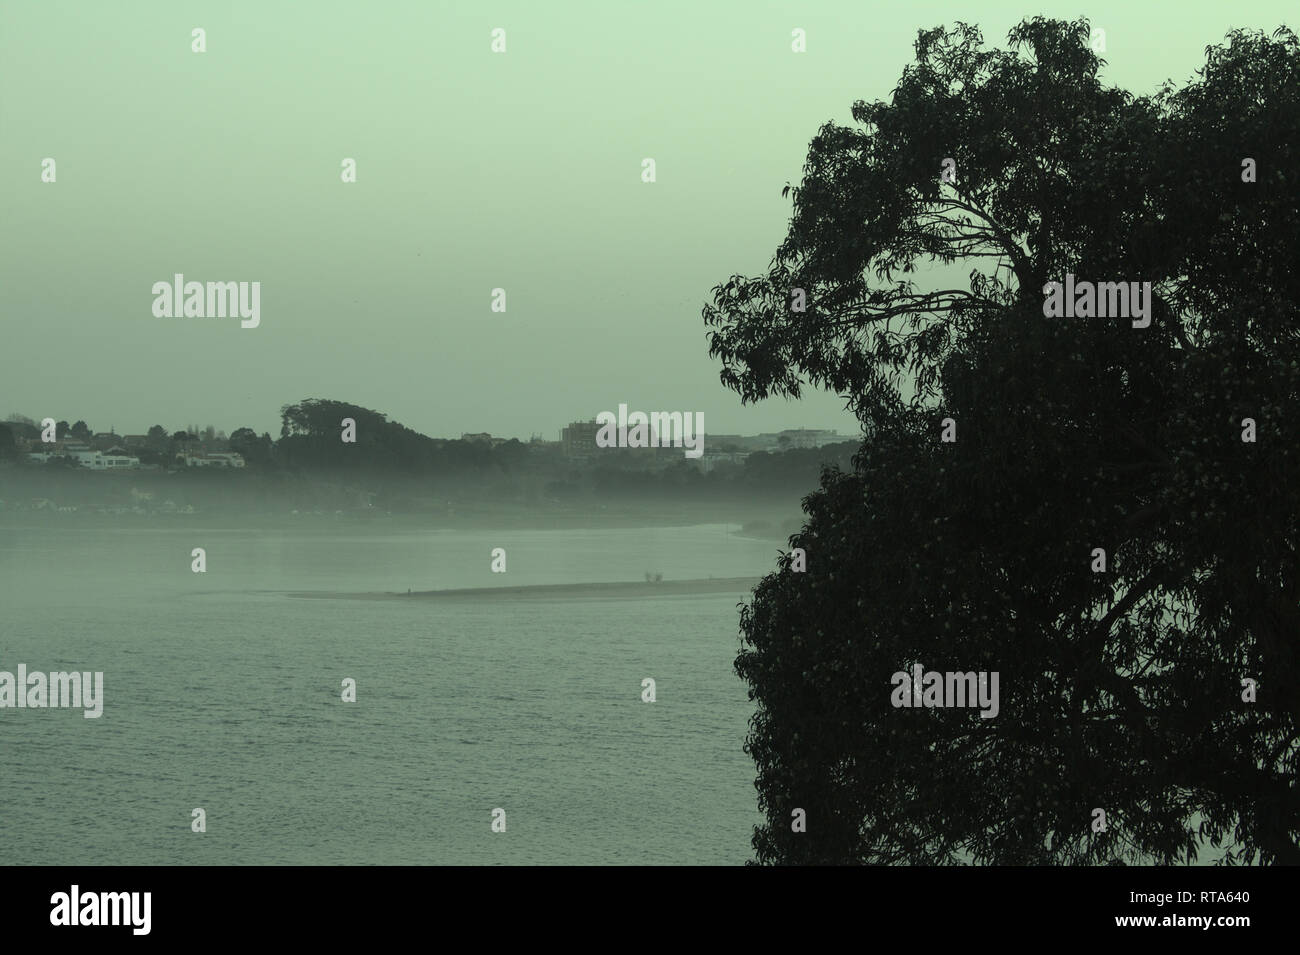 Partial tree with the Douro river and town of Gaia in the distance on a foggy day Stock Photo